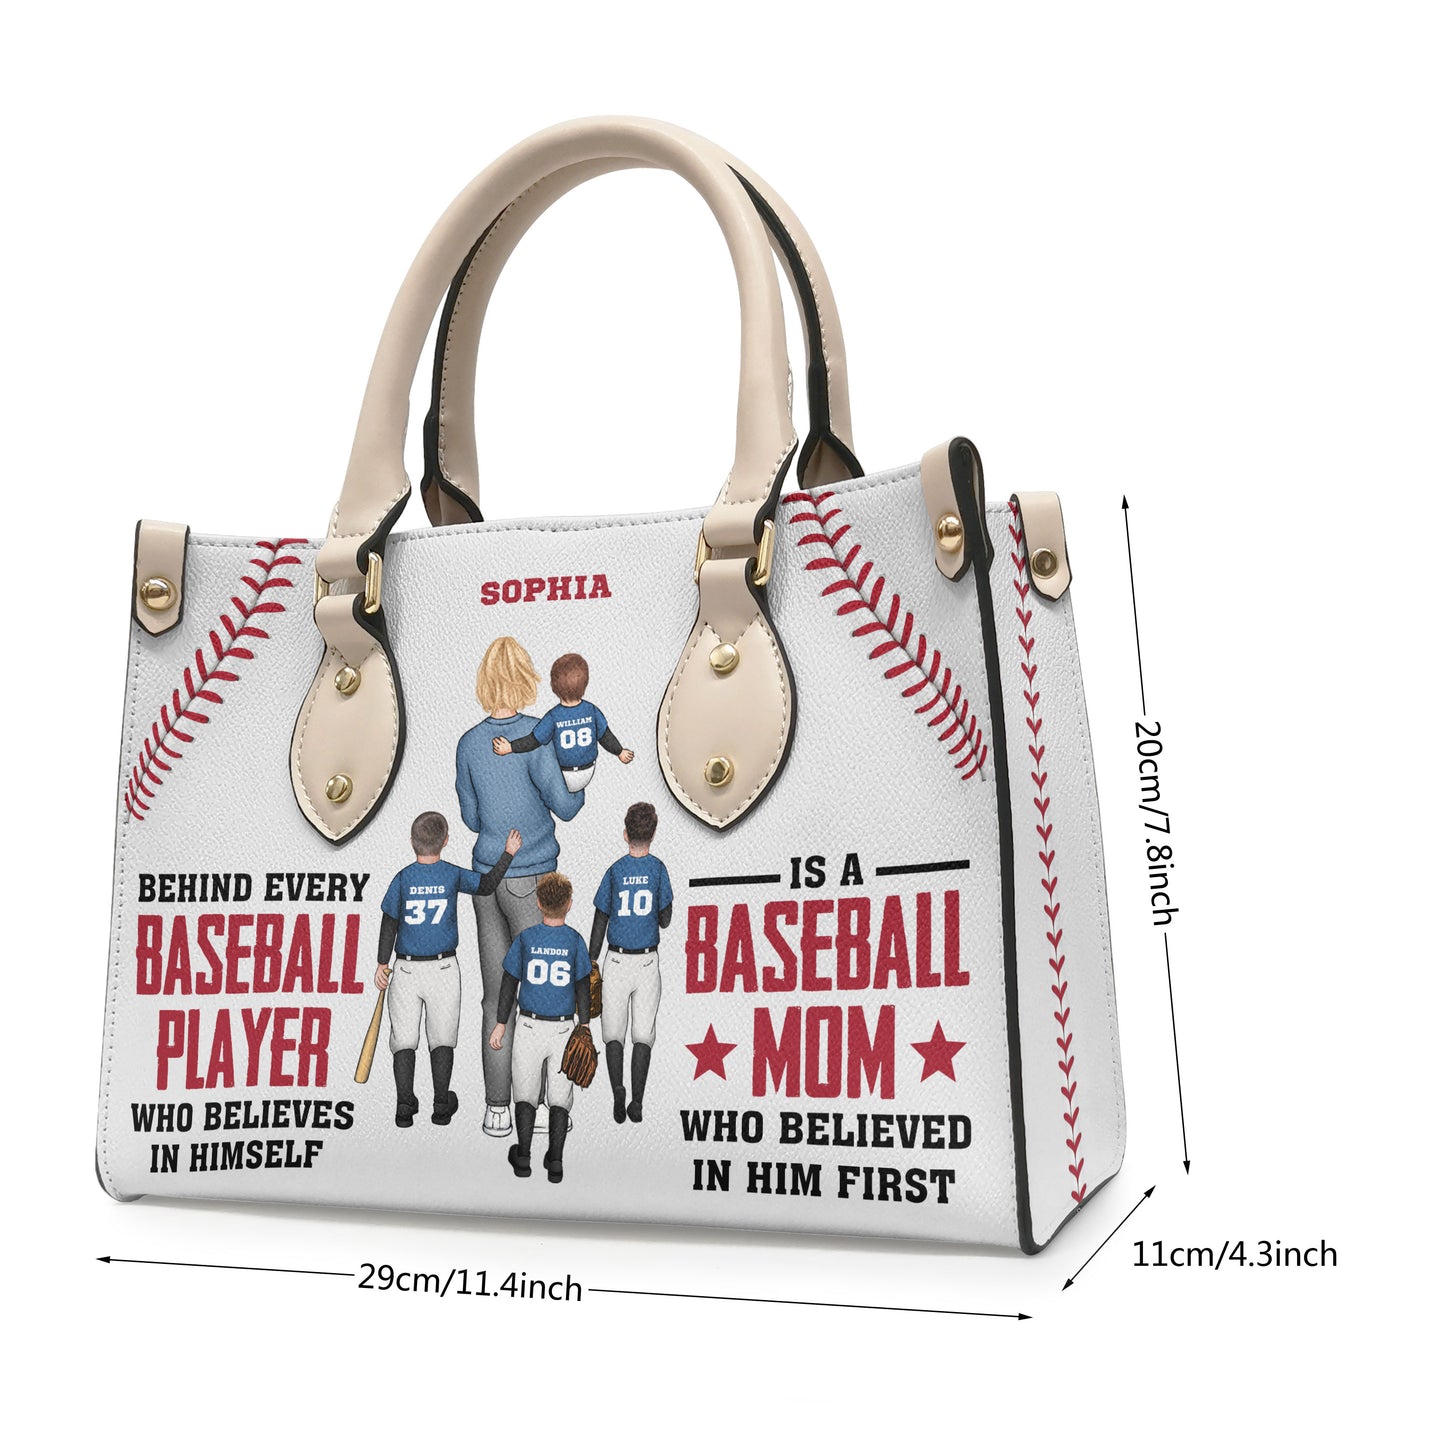 Behind Every Baseball Player - Personalized Leather Bag